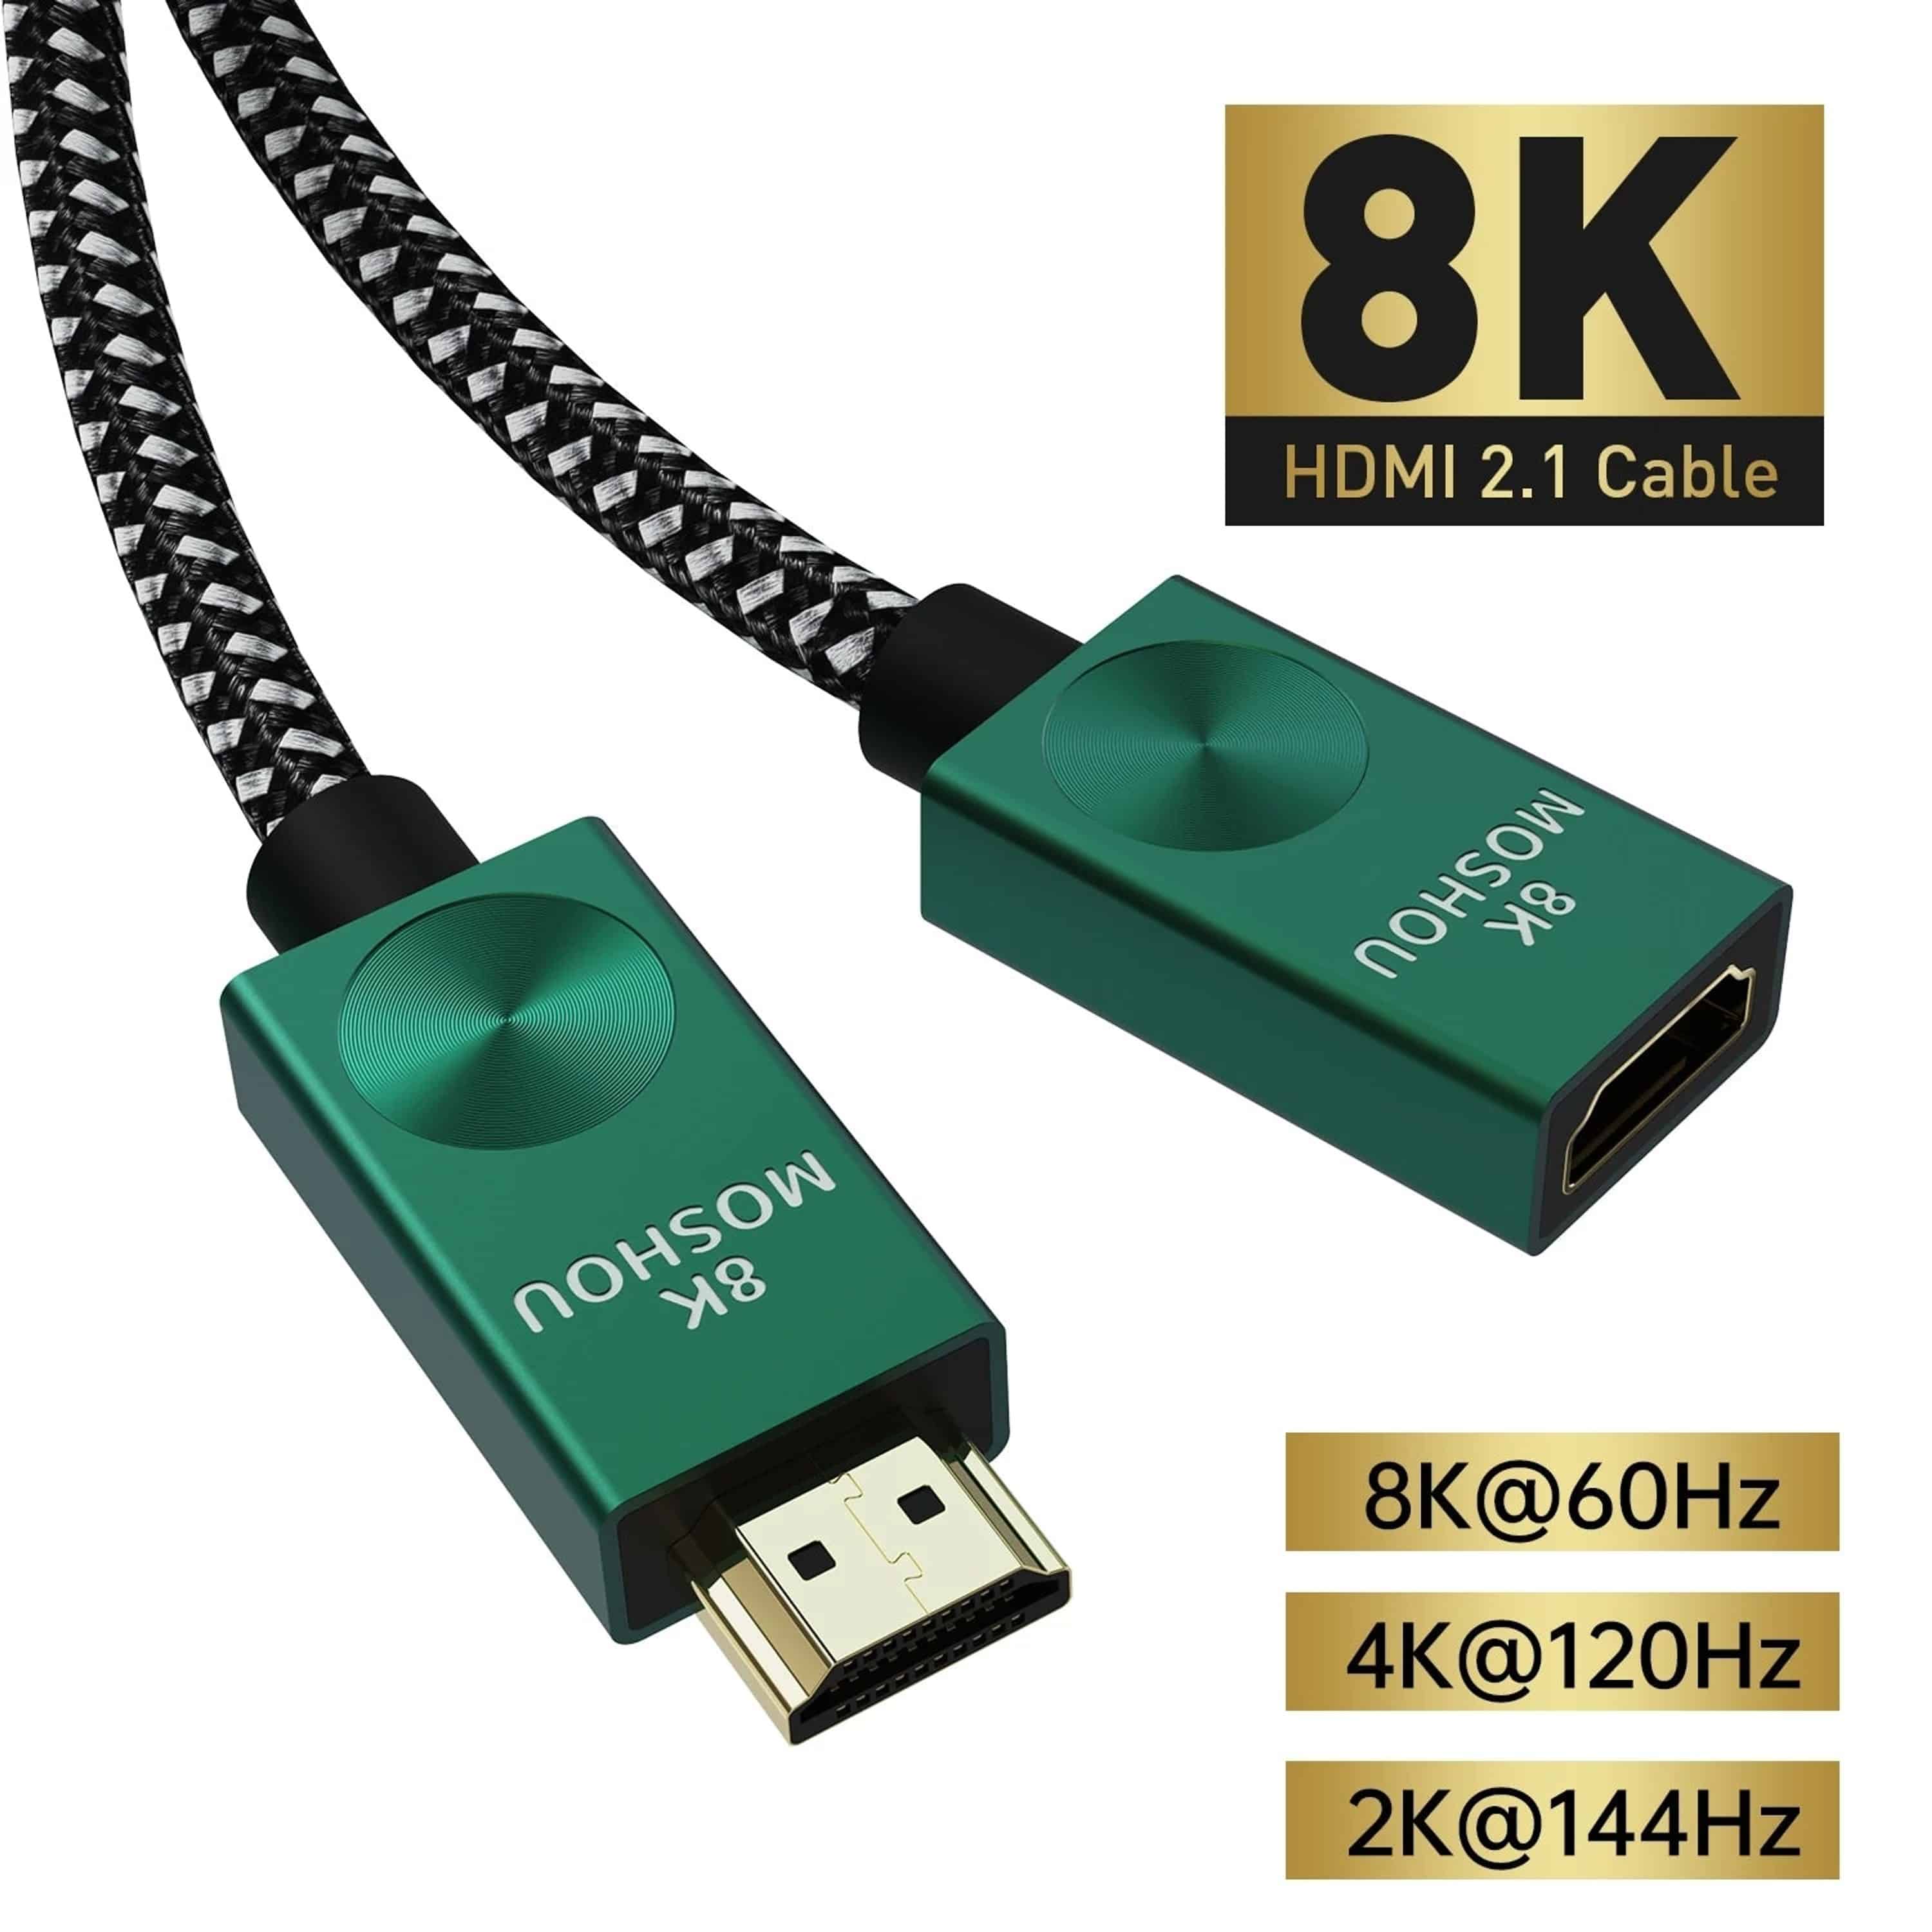 HDMI 2.1 Cable 8K 60Hz 4K 120Hz 48Gbps eARC HDR Video Male to Female Cable Female to Male Cord SIKAI CASE